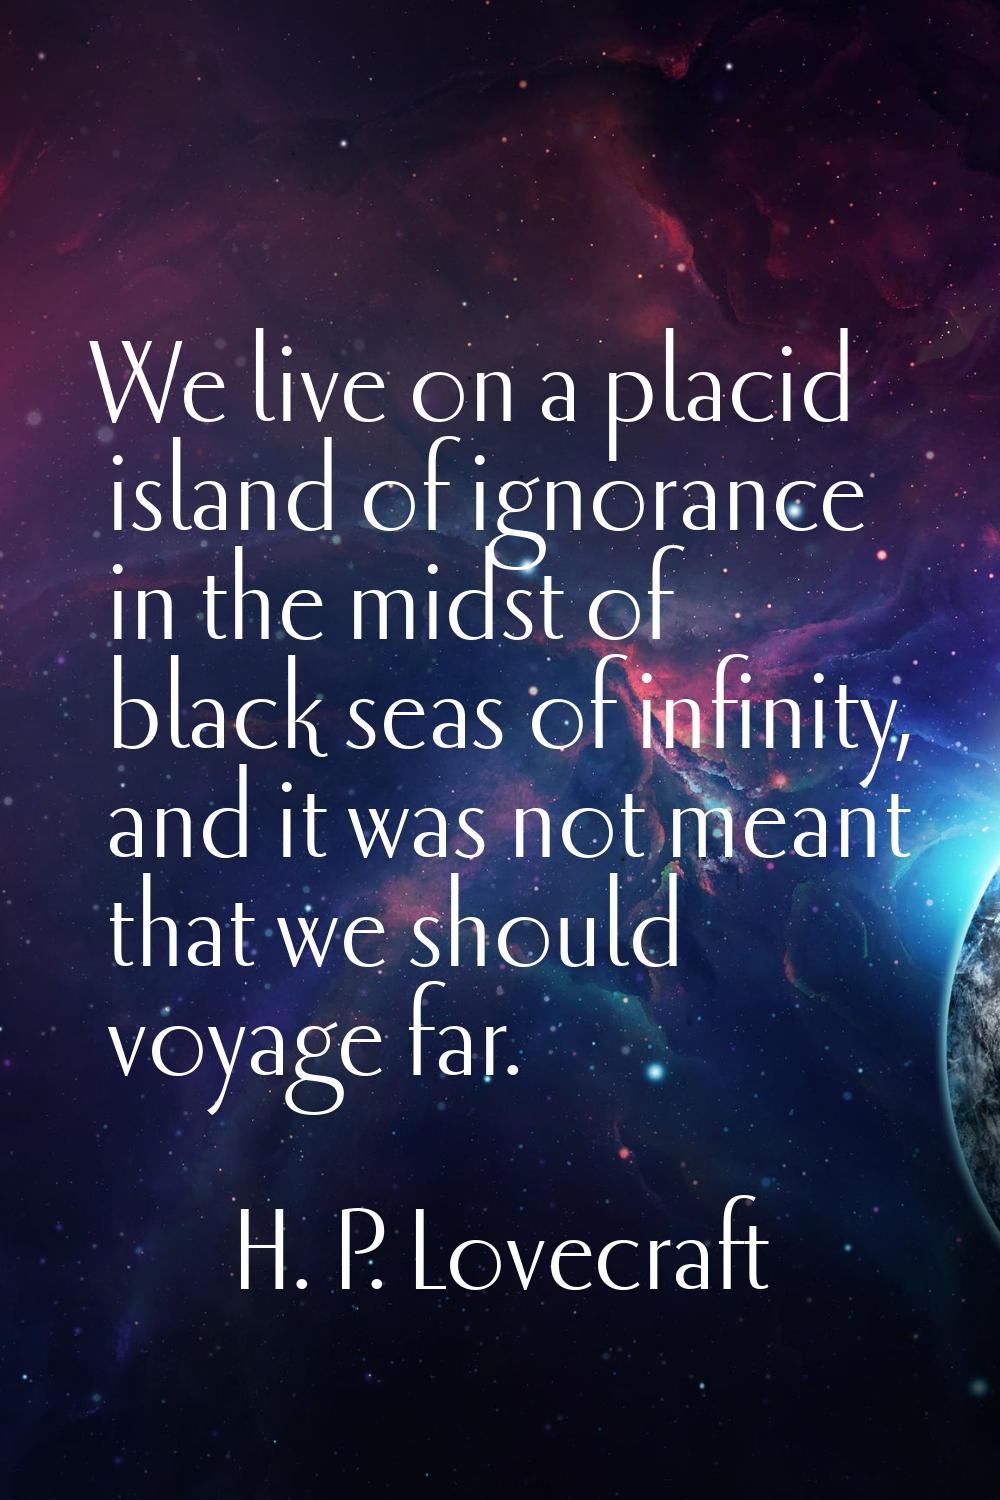 We live on a placid island of ignorance in the midst of black seas of infinity, and it was not mean